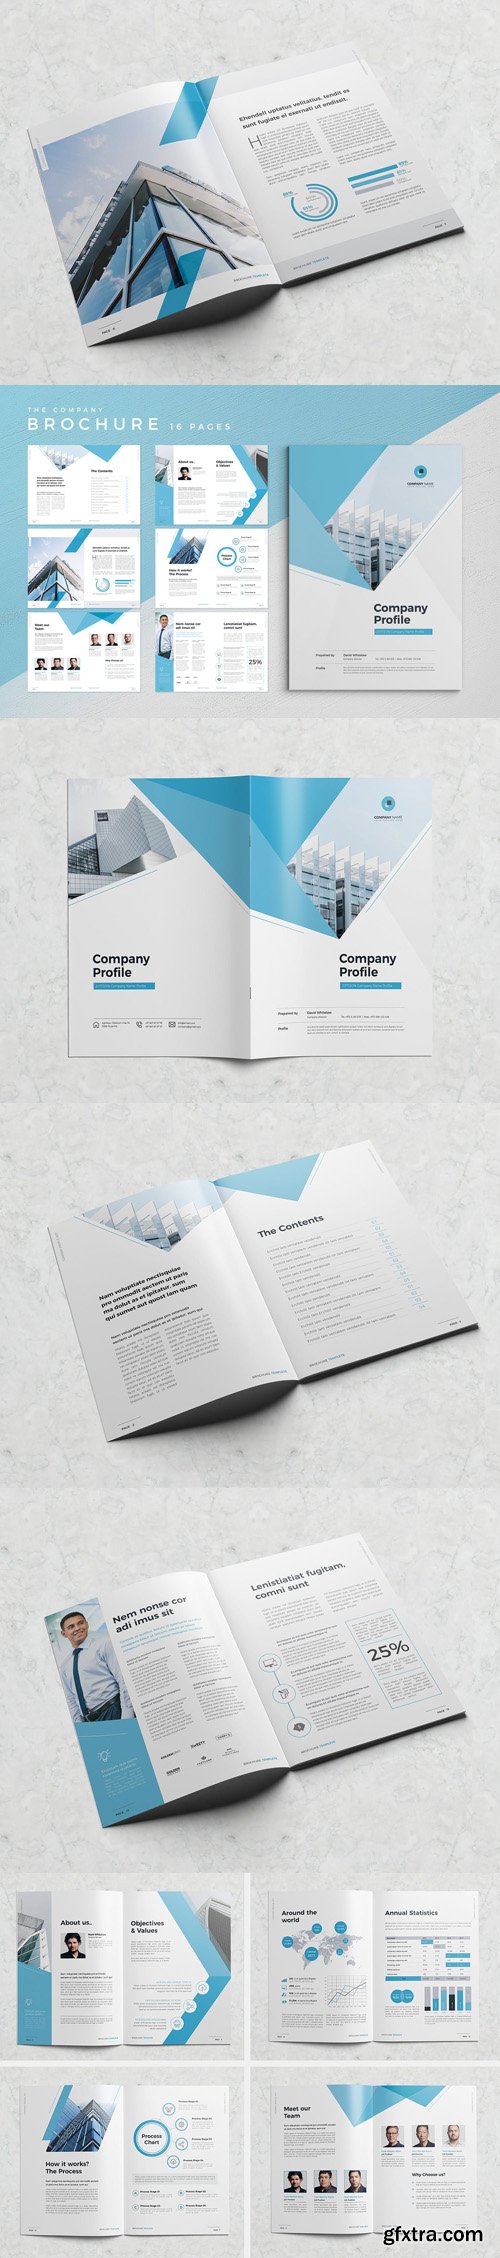 Minimal Company Profile 16 Pages